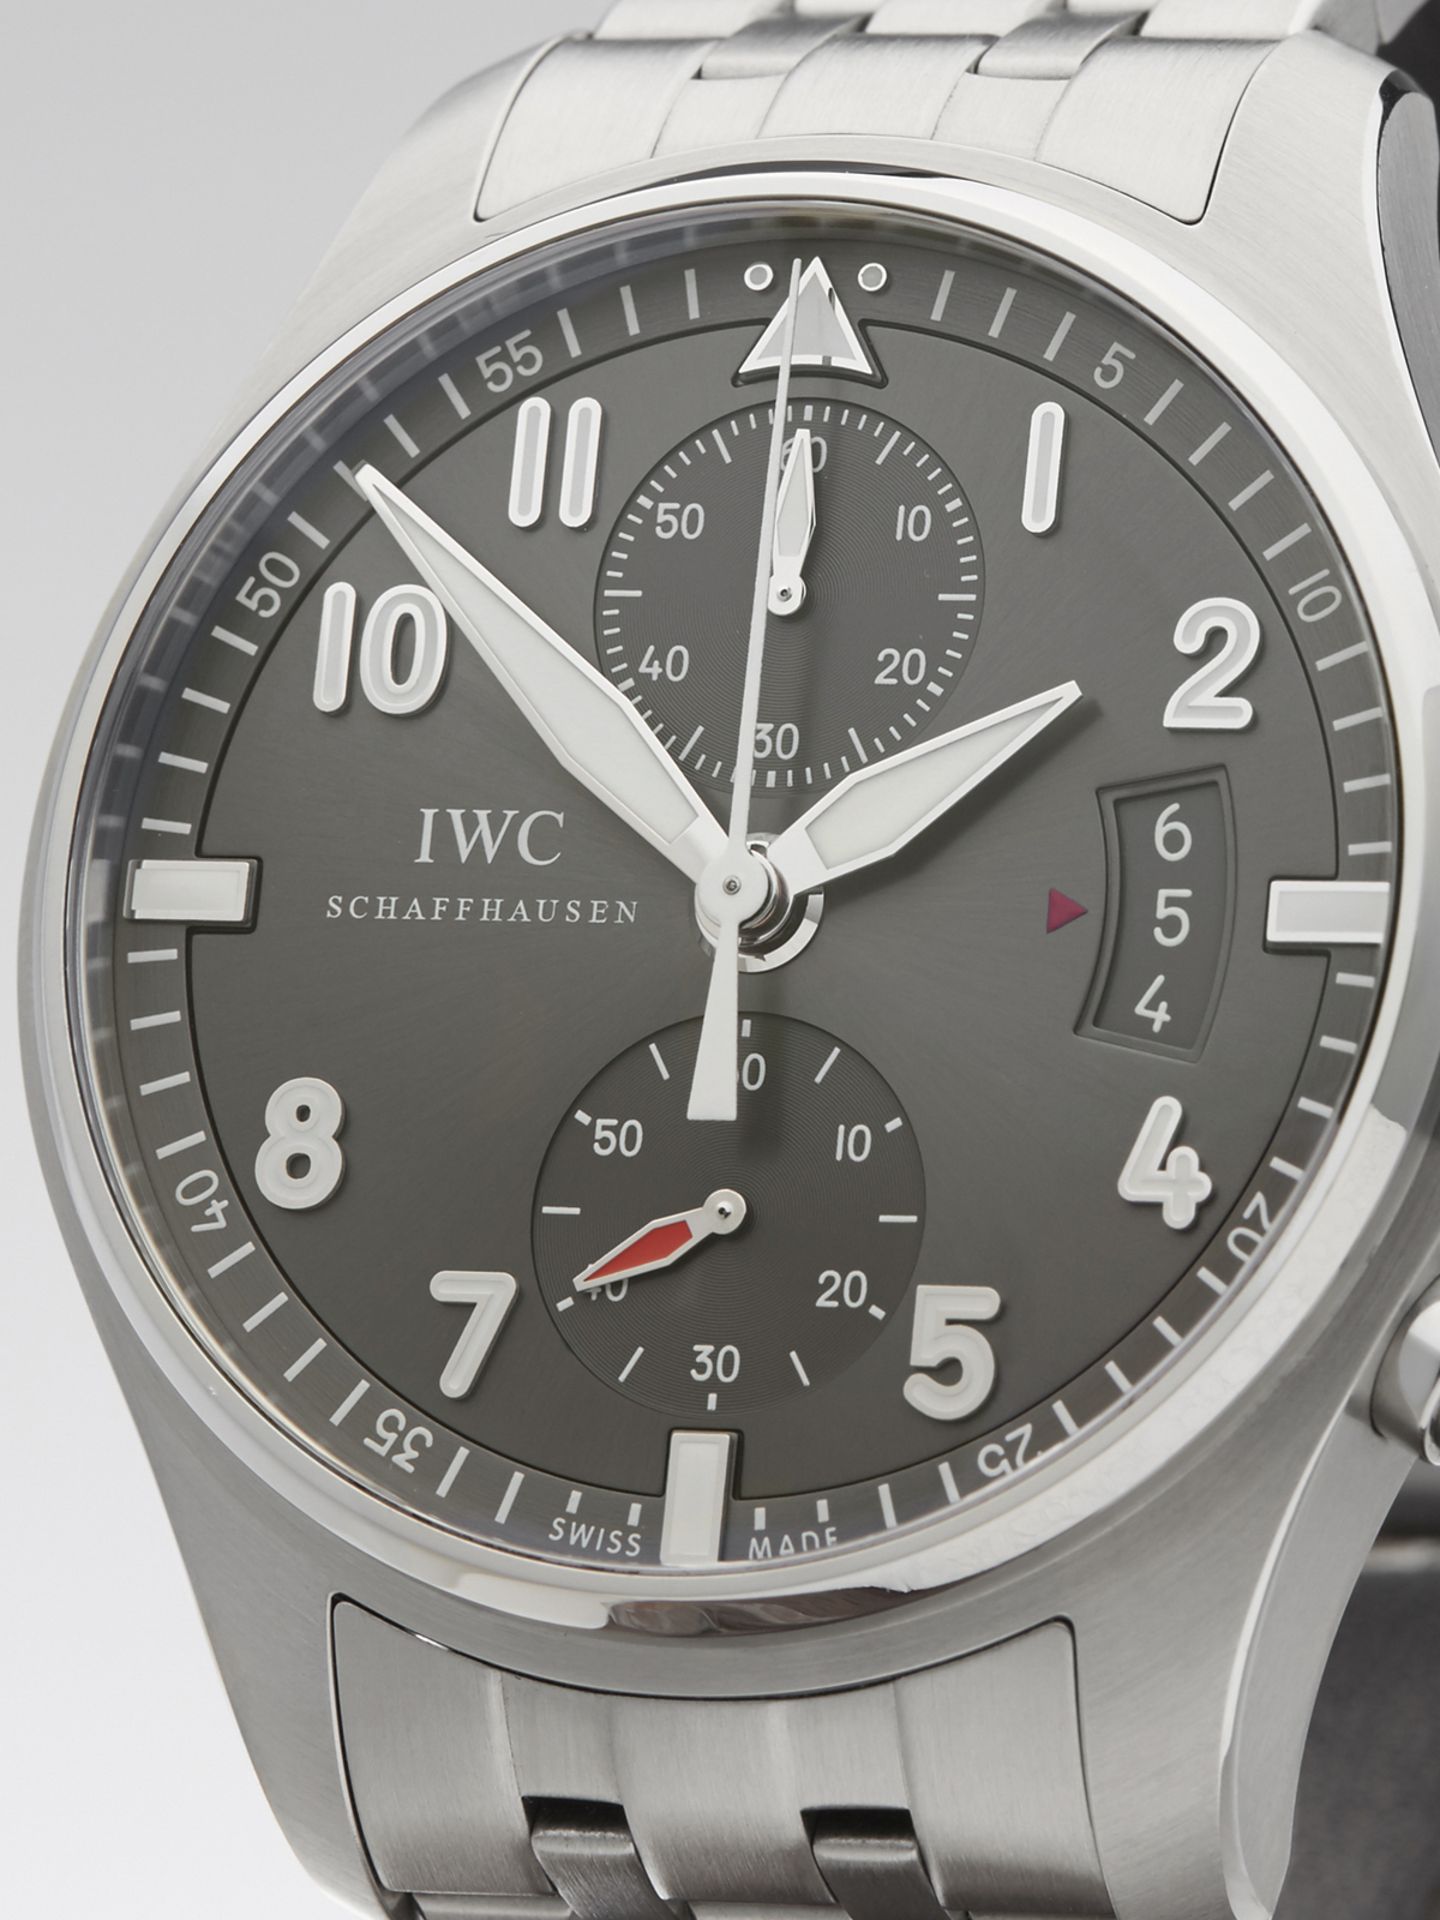 IWC Pilot's Chronograph Spitfire 43mm Stainless Steel IW387804 - Image 3 of 9